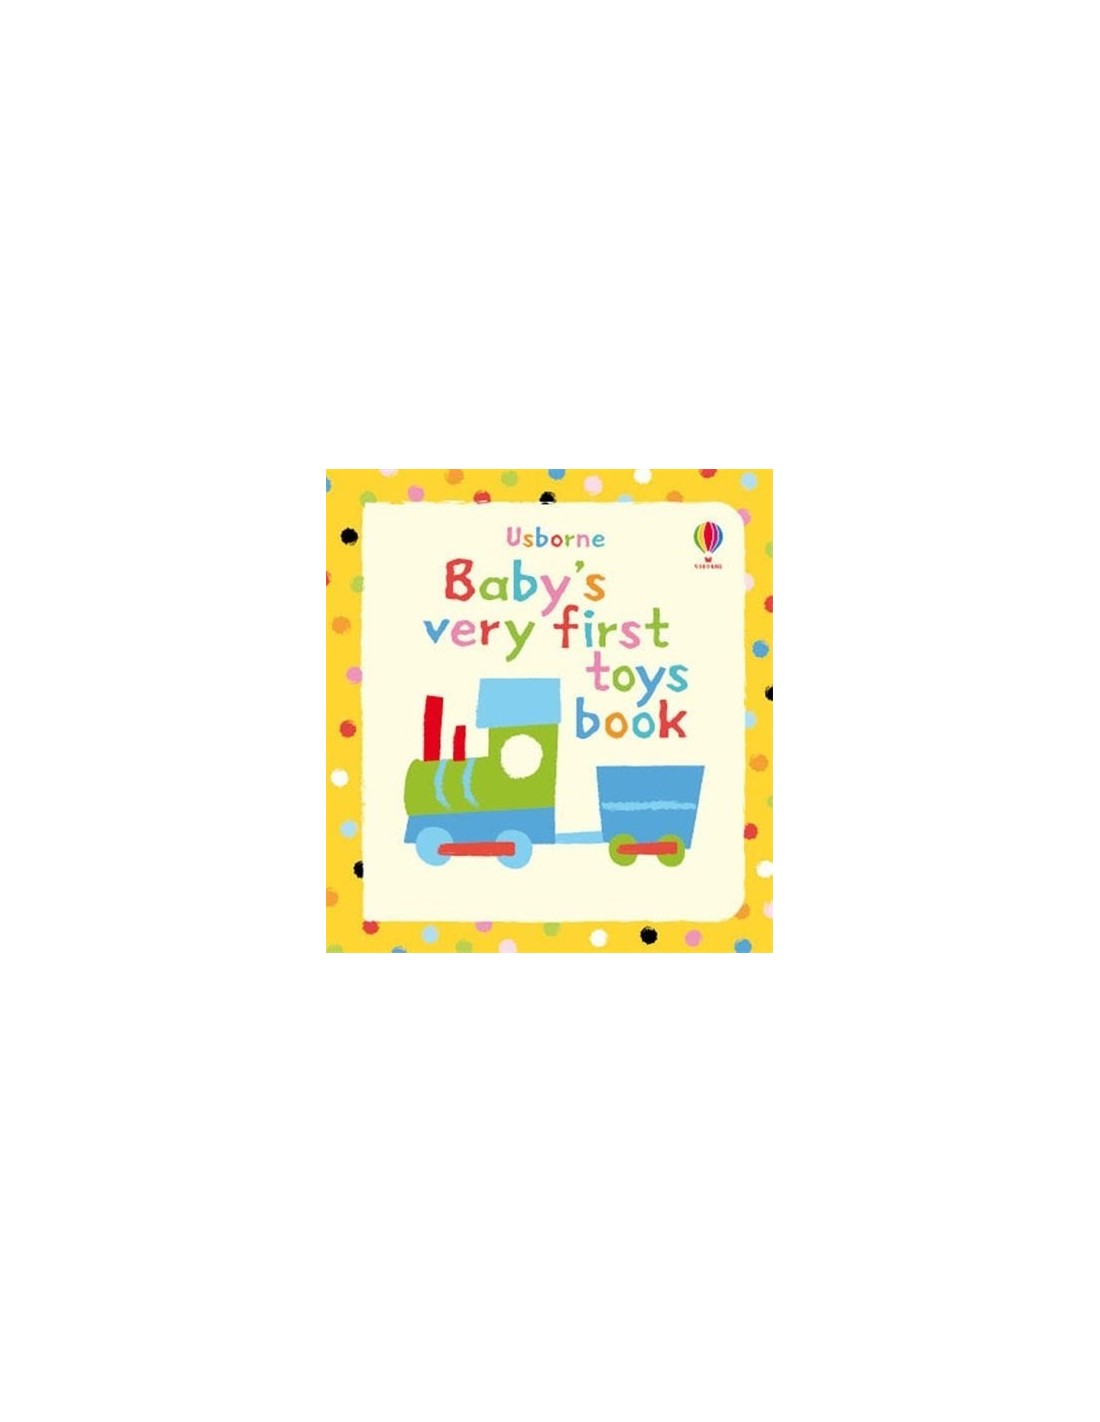 Baby's very first toys book